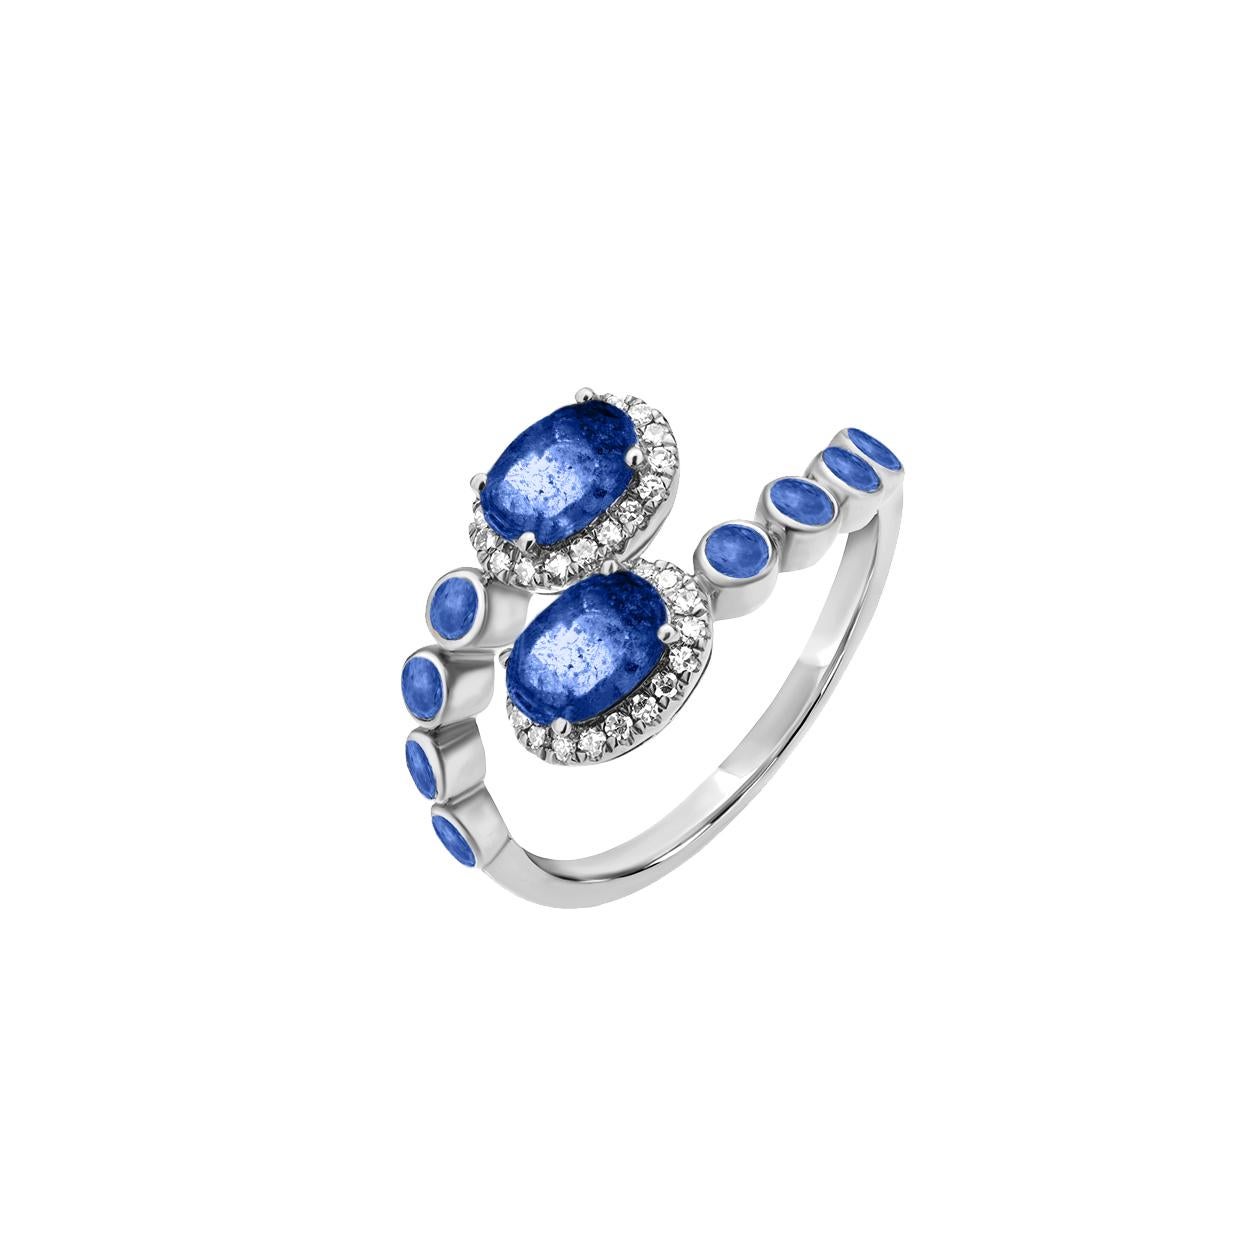 Contemporary Gemistry 1.87 Cttw. Diamond and Blue Sapphire Swirl Ring in 18k White Gold For Sale